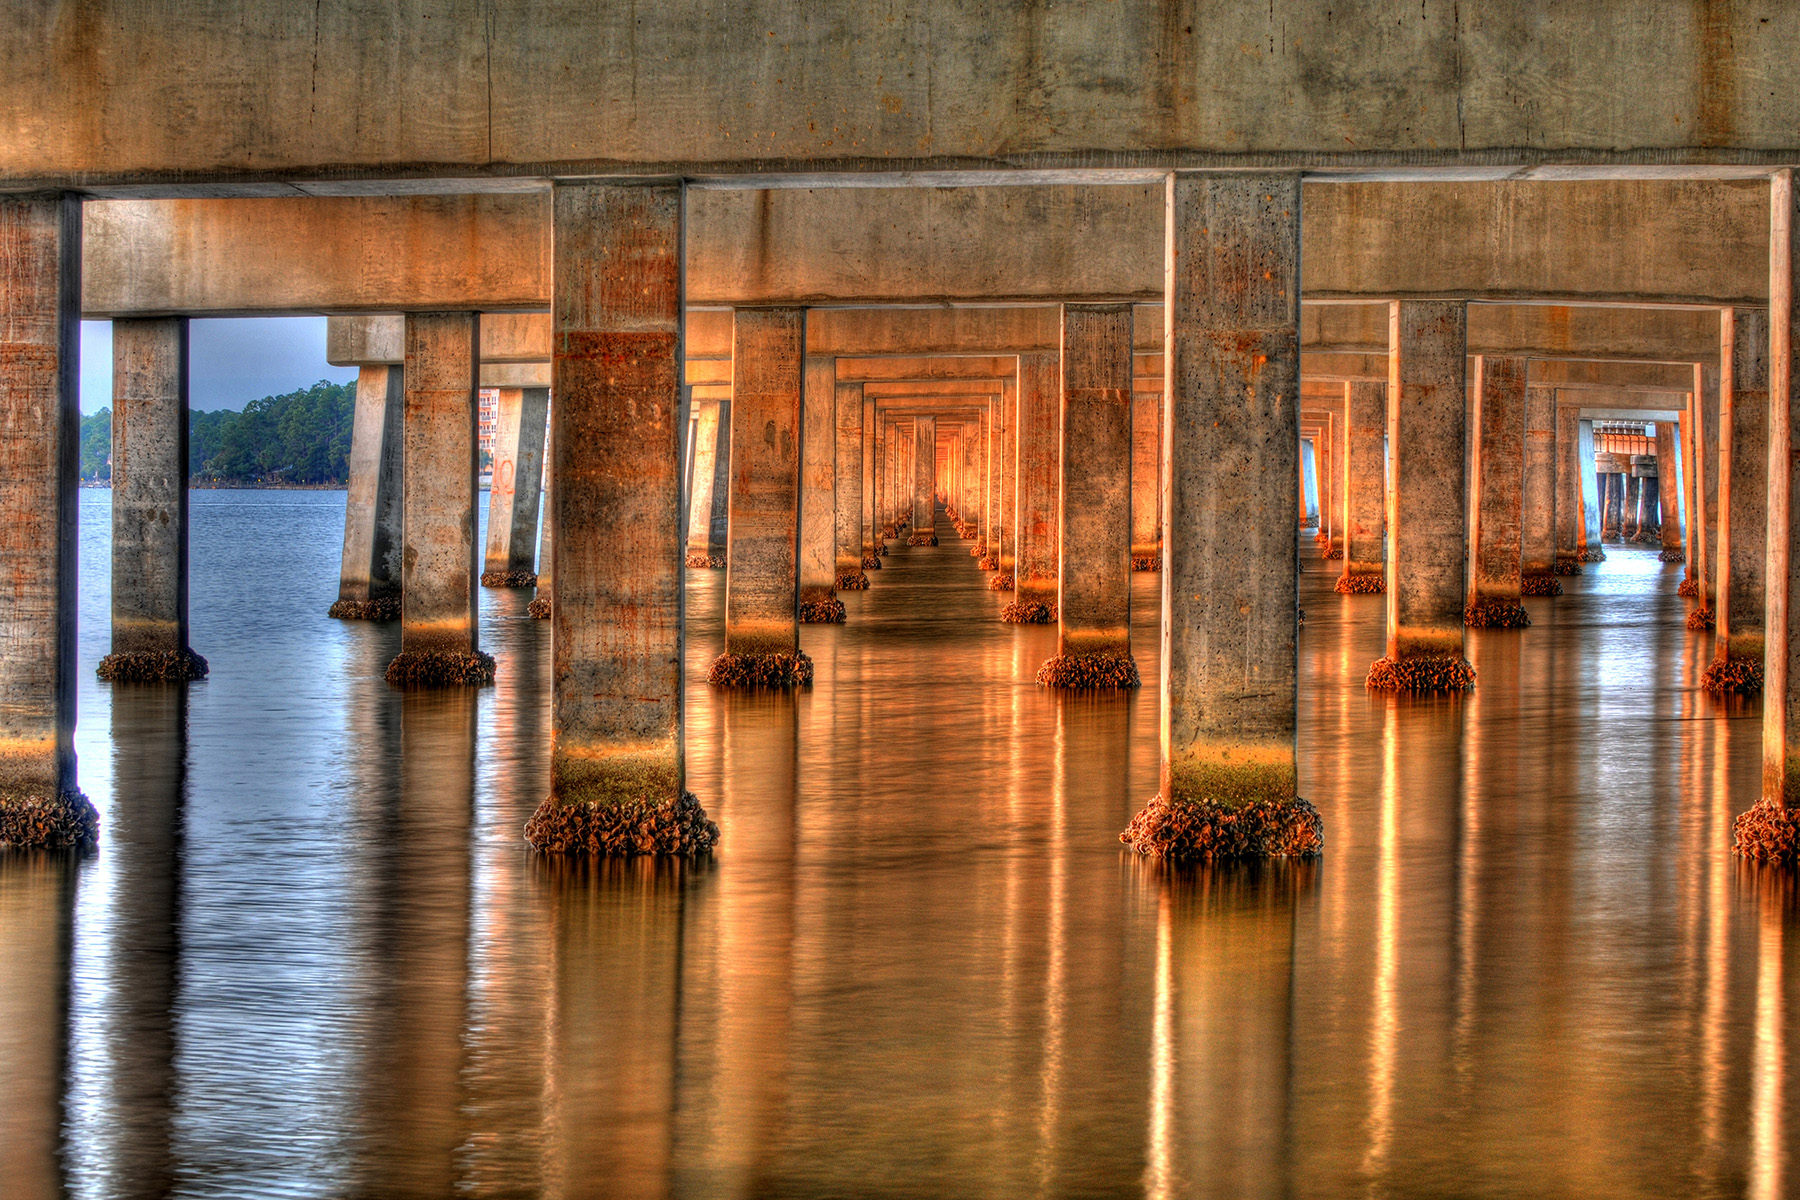 Under a dock with serene waters flowing through